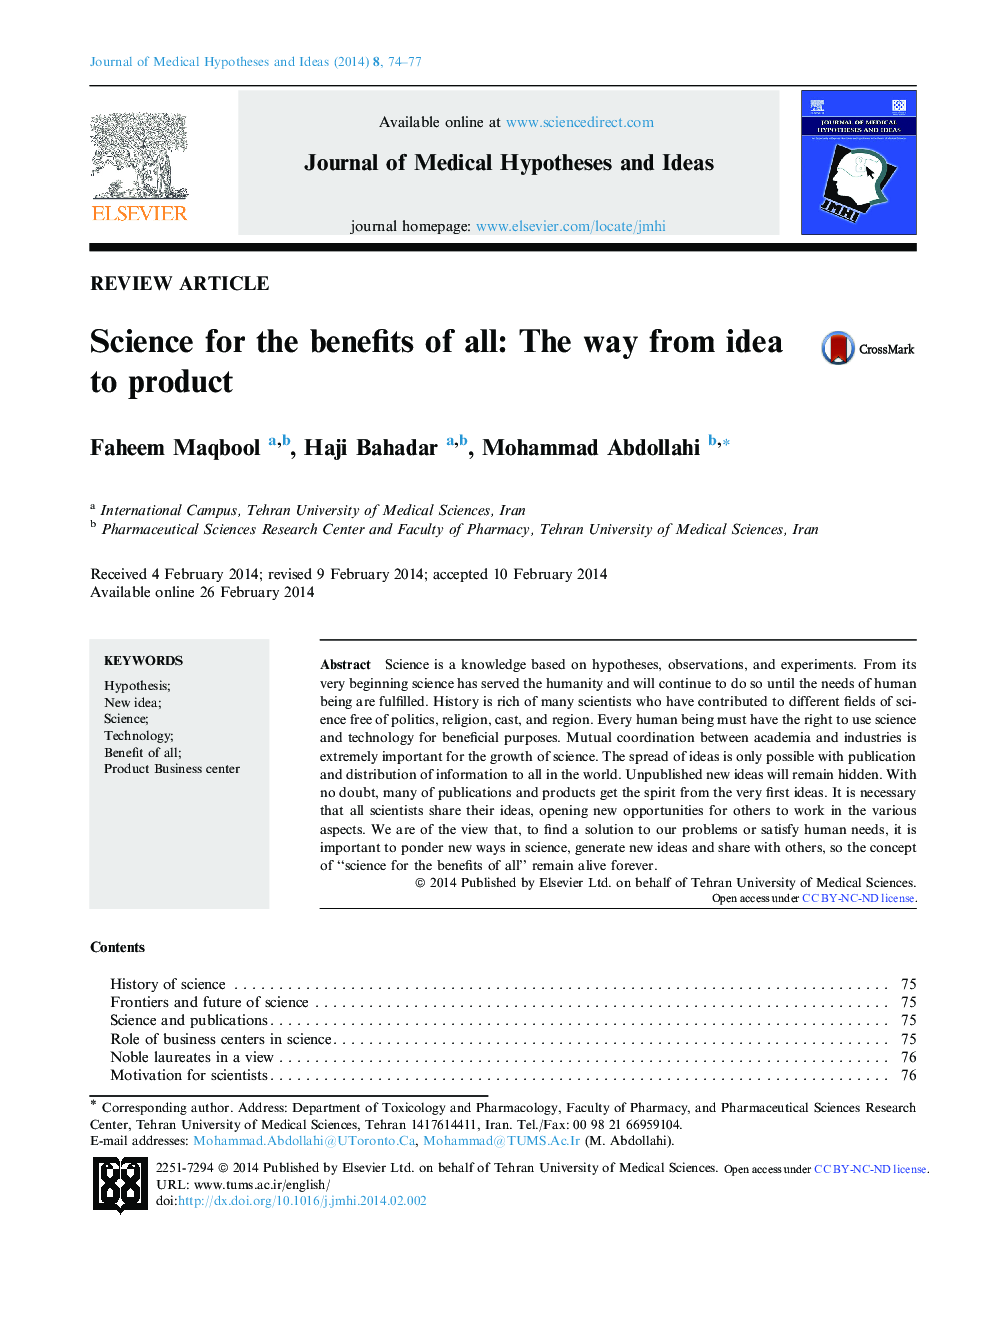 Science for the benefits of all: The way from idea to product 